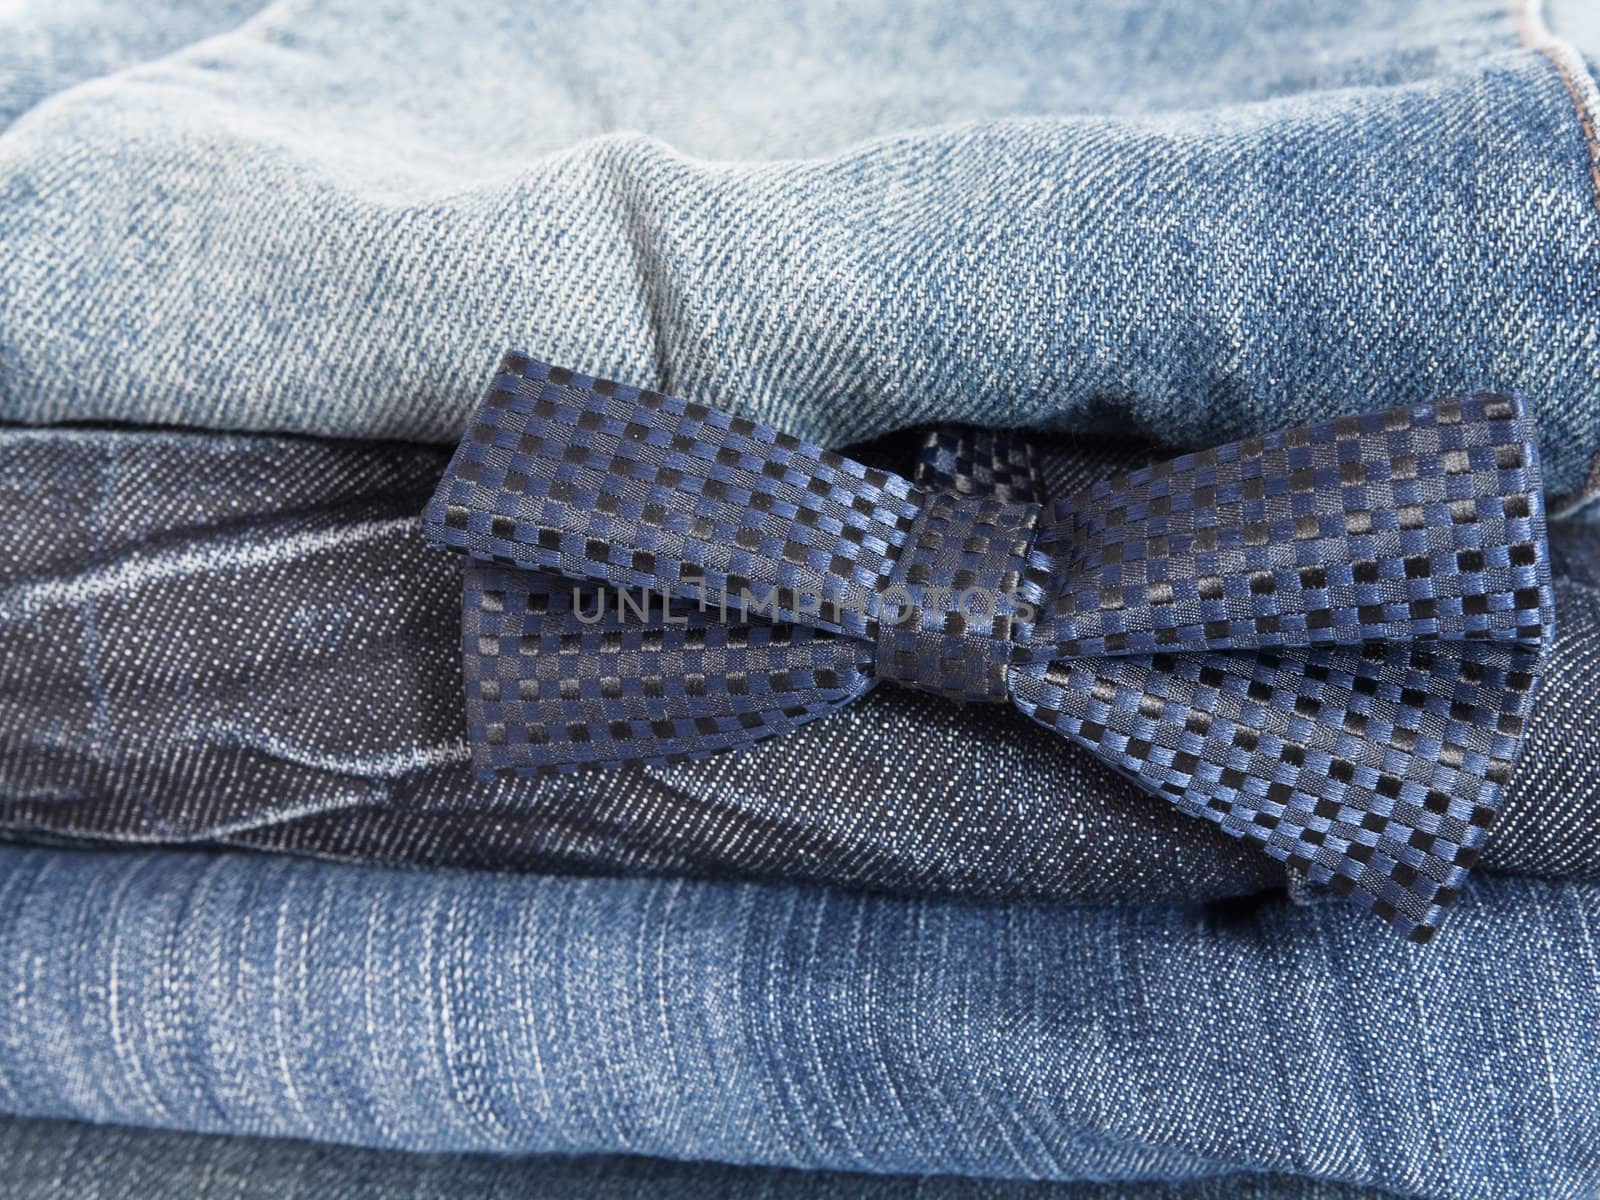 heap of jeans and decorative tie as a fashion background